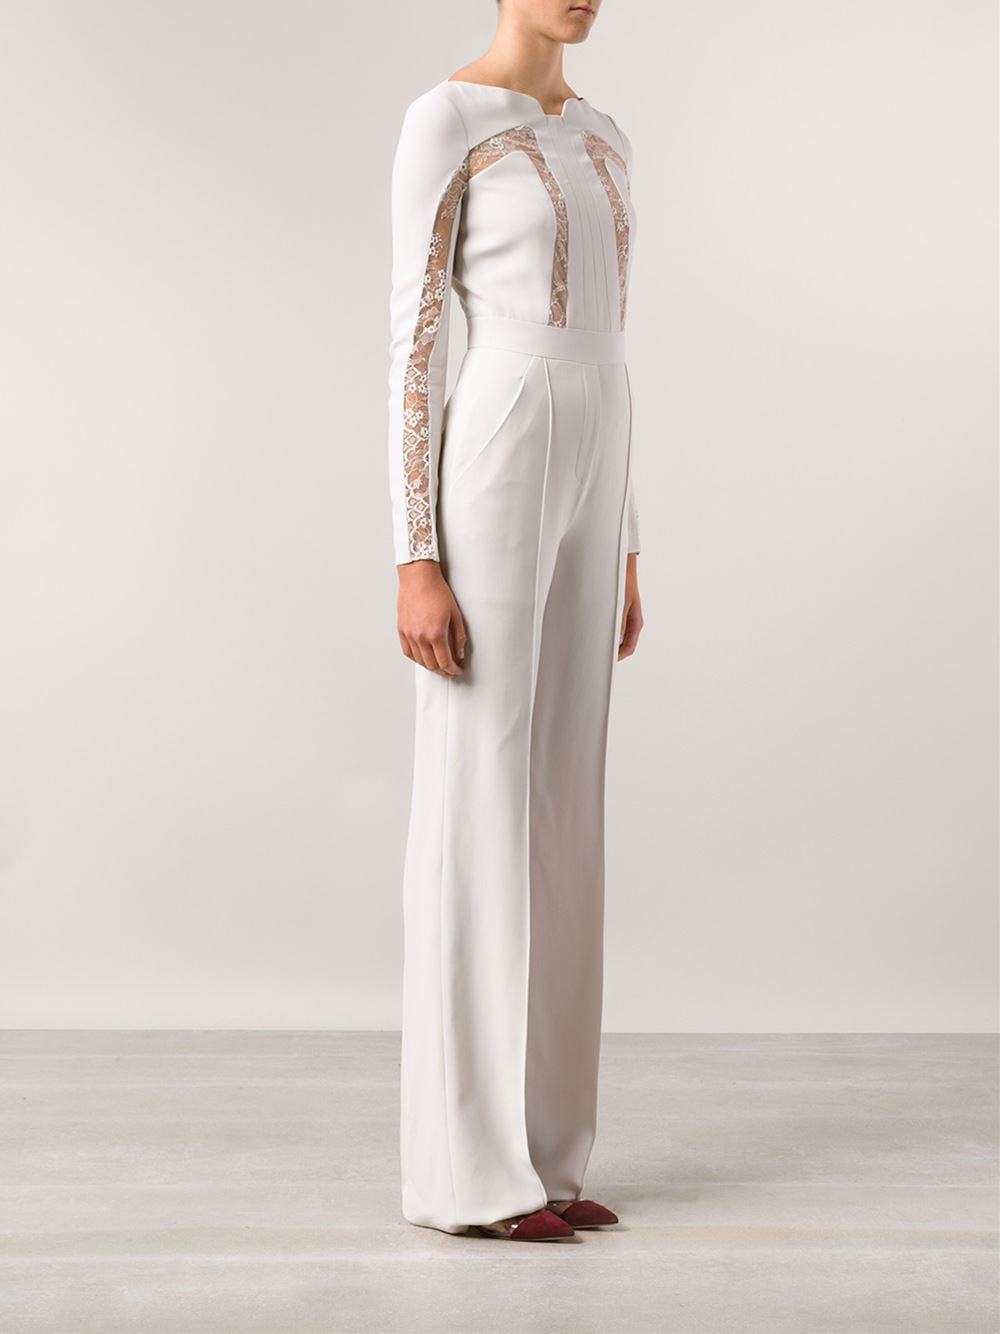 Lyst - Elie Saab Lace Insert Jumpsuit in White